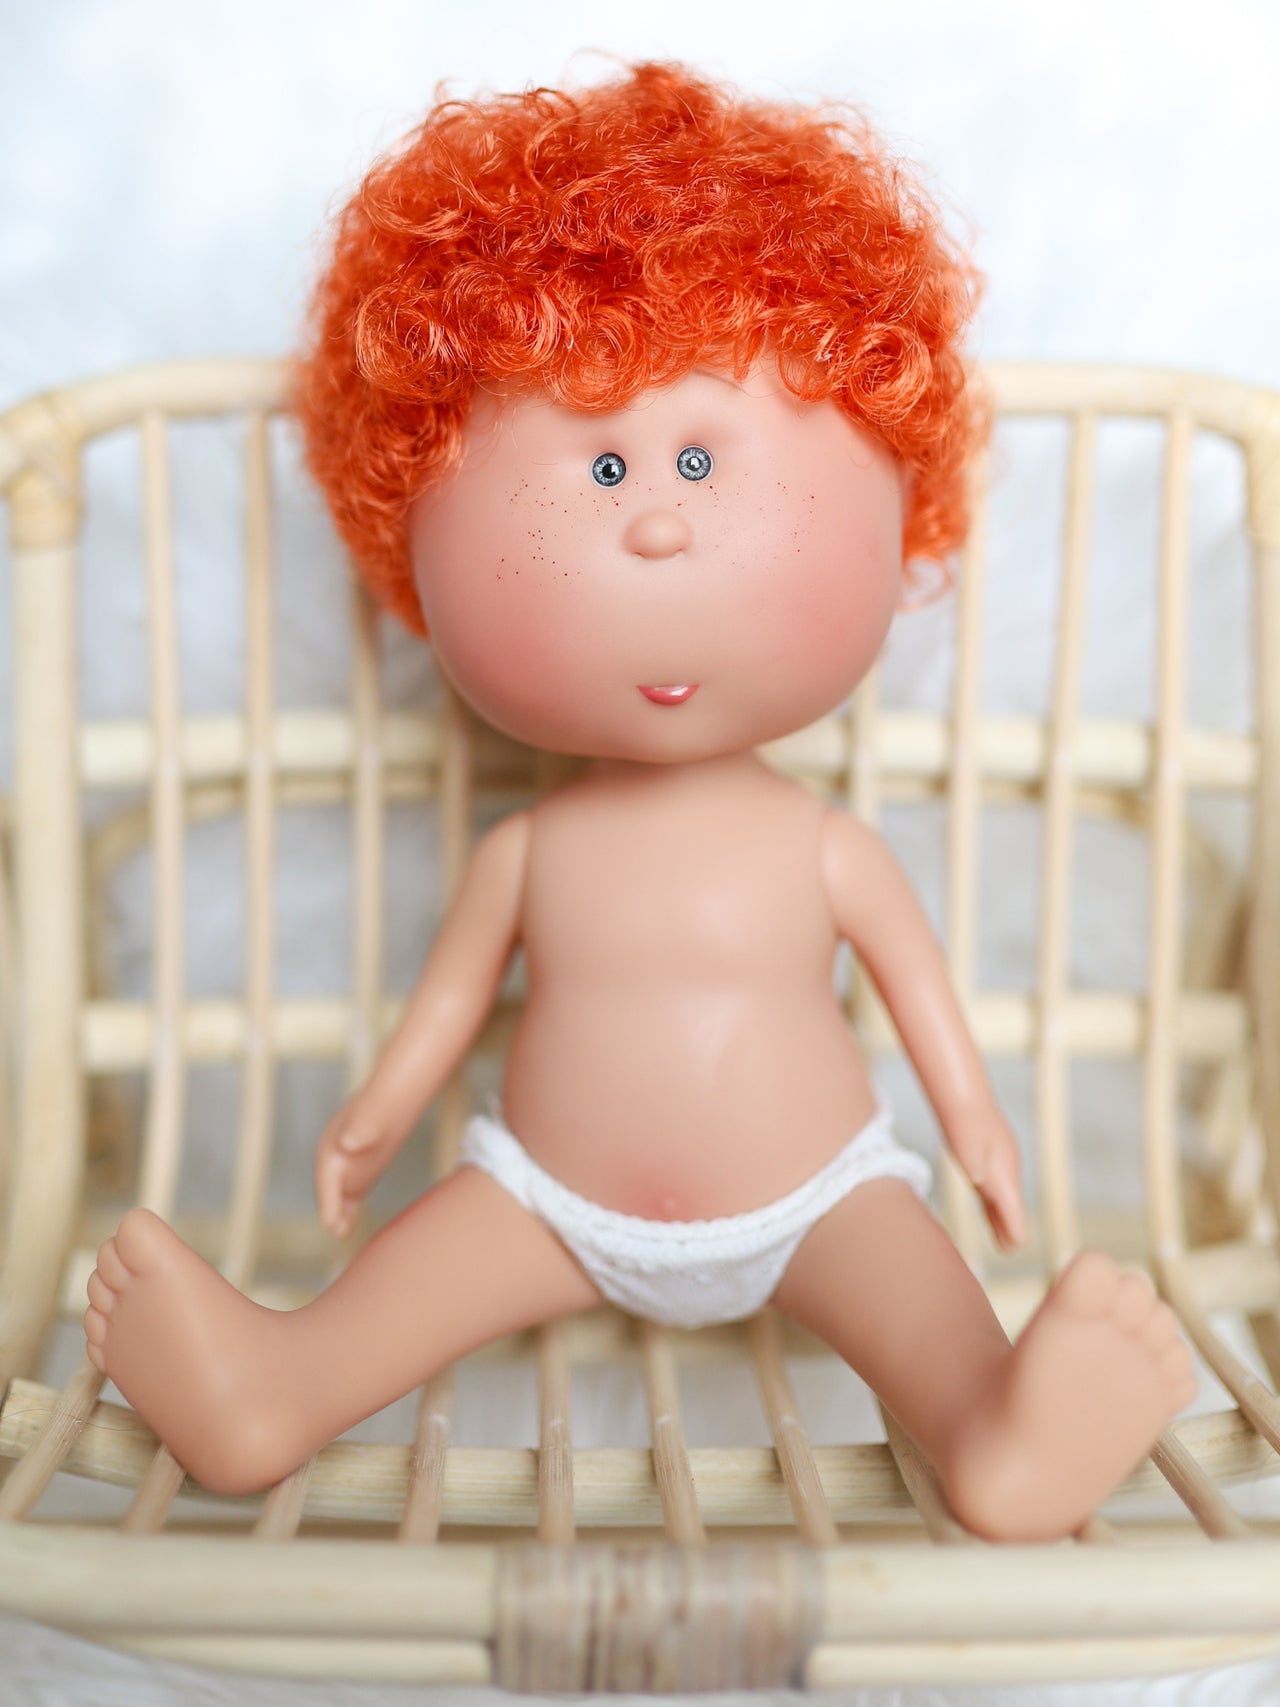 Robbie - Mio Doll with Orange/Red Curly Hair